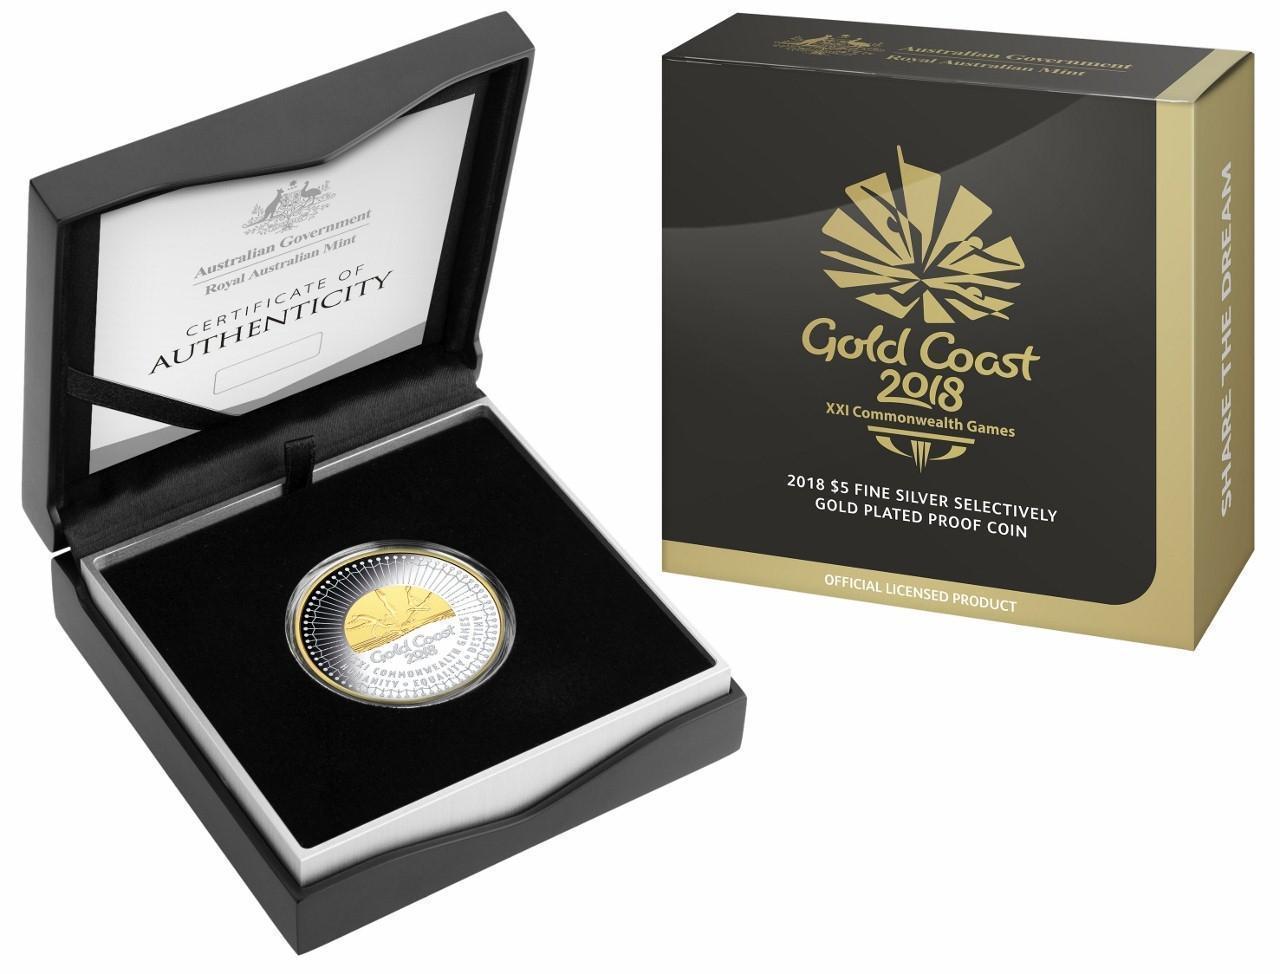 2018 XXI Commonwealth Games – $5 Fine Silver Selectively Gold Plated Proof Coin Royal Australian Mint RAM 